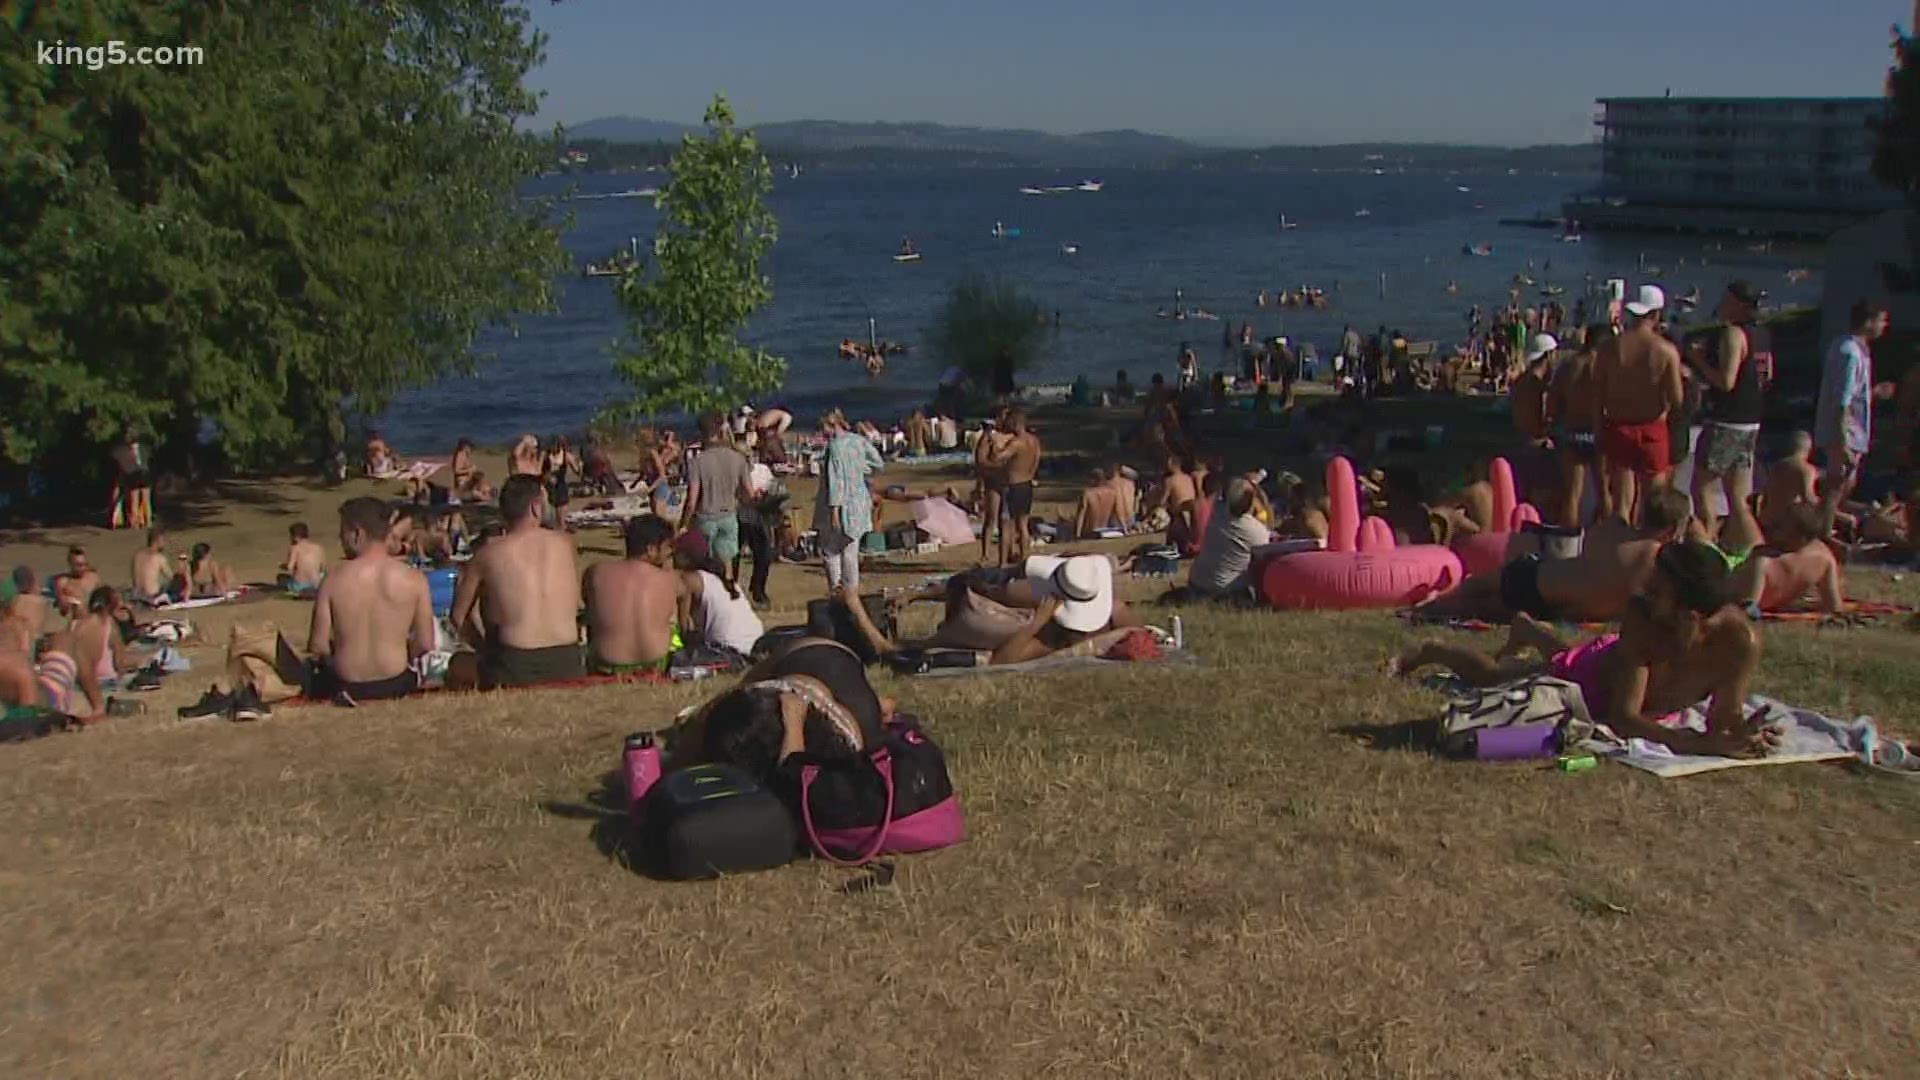 With people flocking to beaches, the impacts of the coronavirus are creating a few issues.